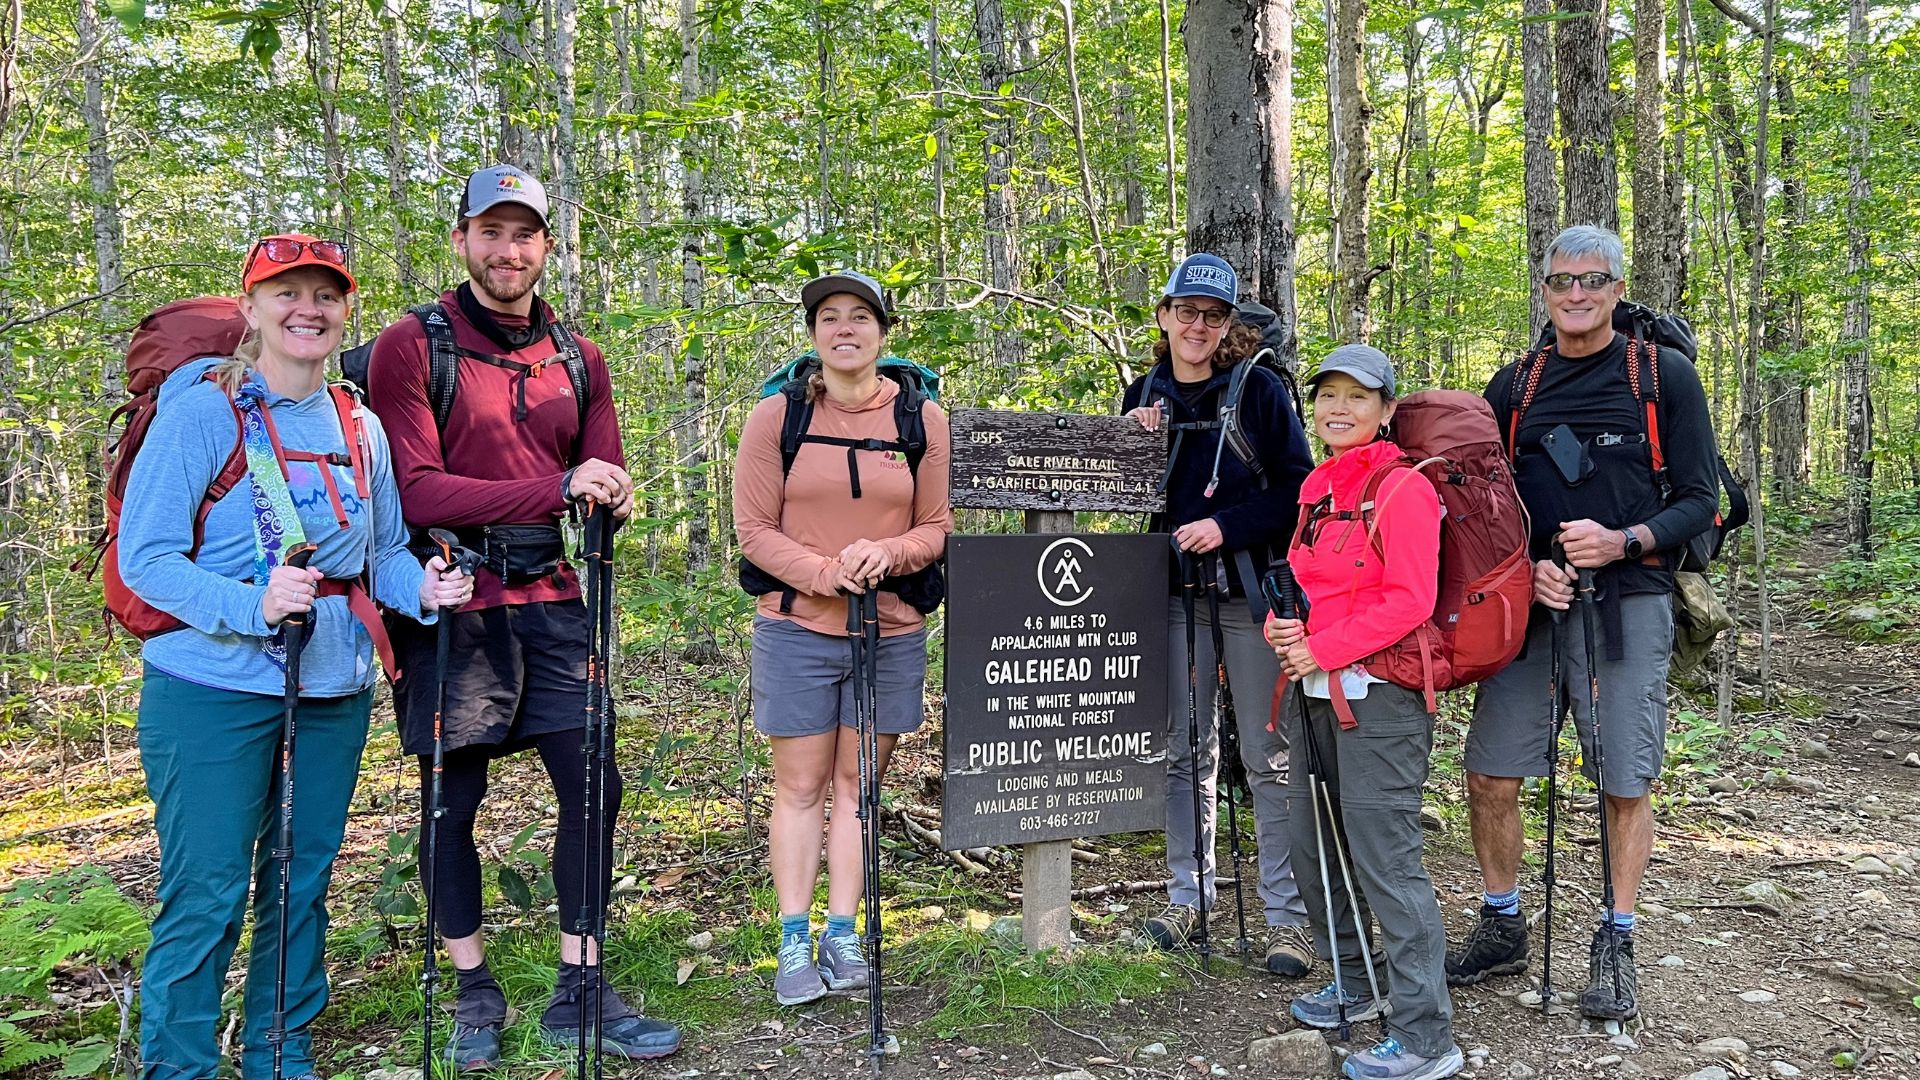 Hikers stand next to a sign for the Appalachian Trail in the White Mountains of New Hampshire